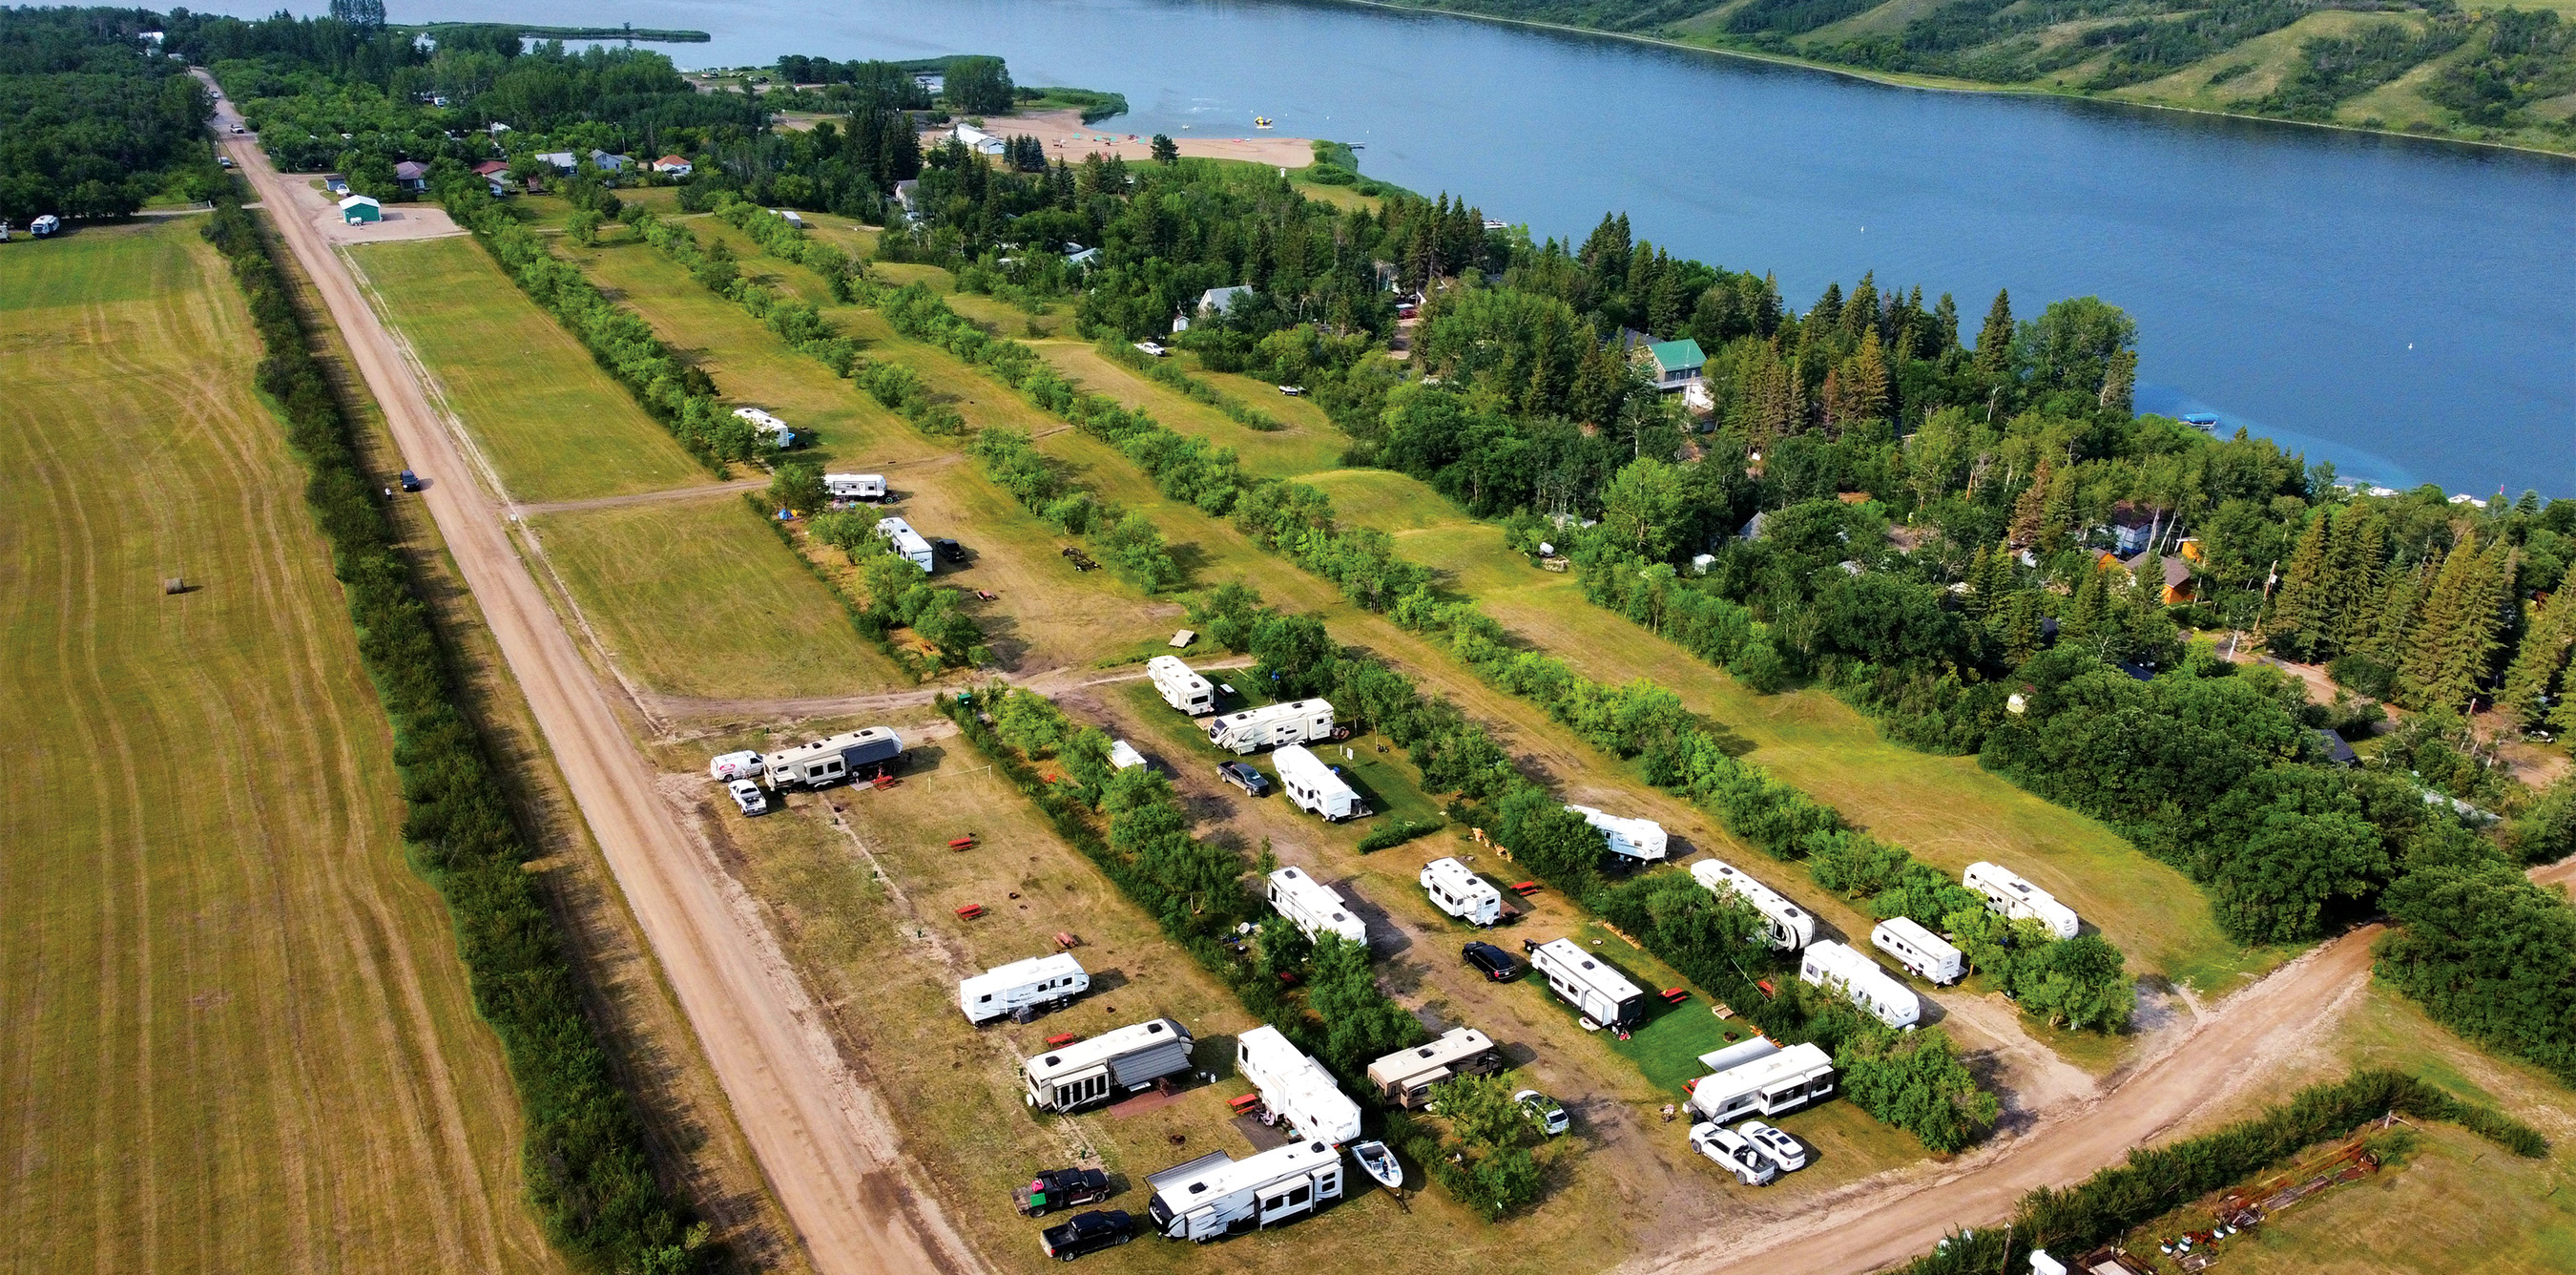 A recent upgrading project has added several 50-amp sites at Moosomin Regional Park, in what had previously been unserviced overflow campsites. Many future upgrades are planned for the park.